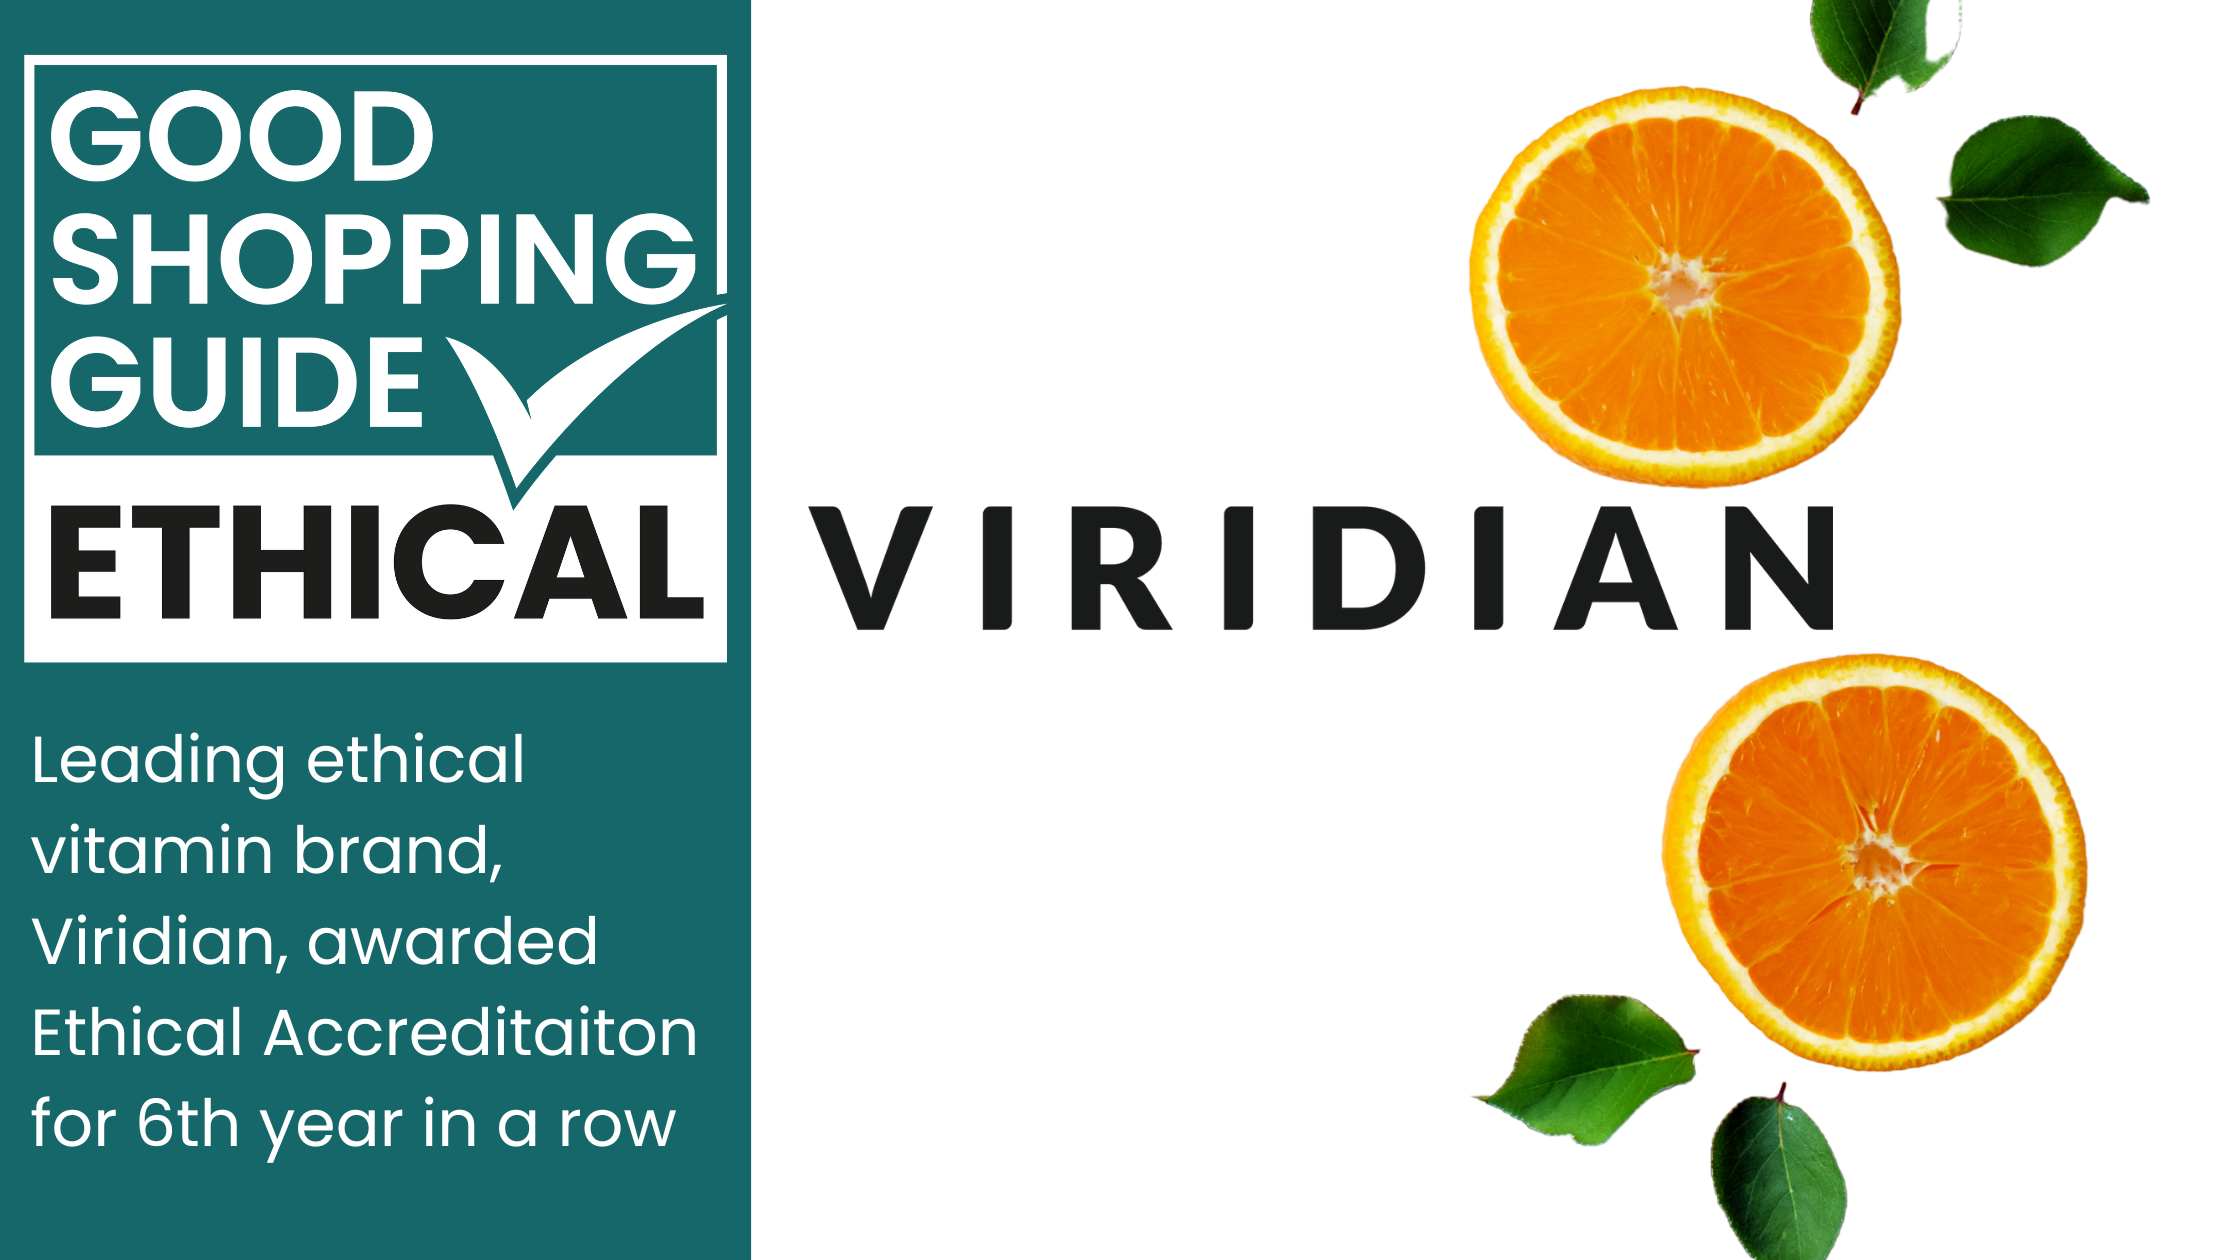 Is Viridian ethical?